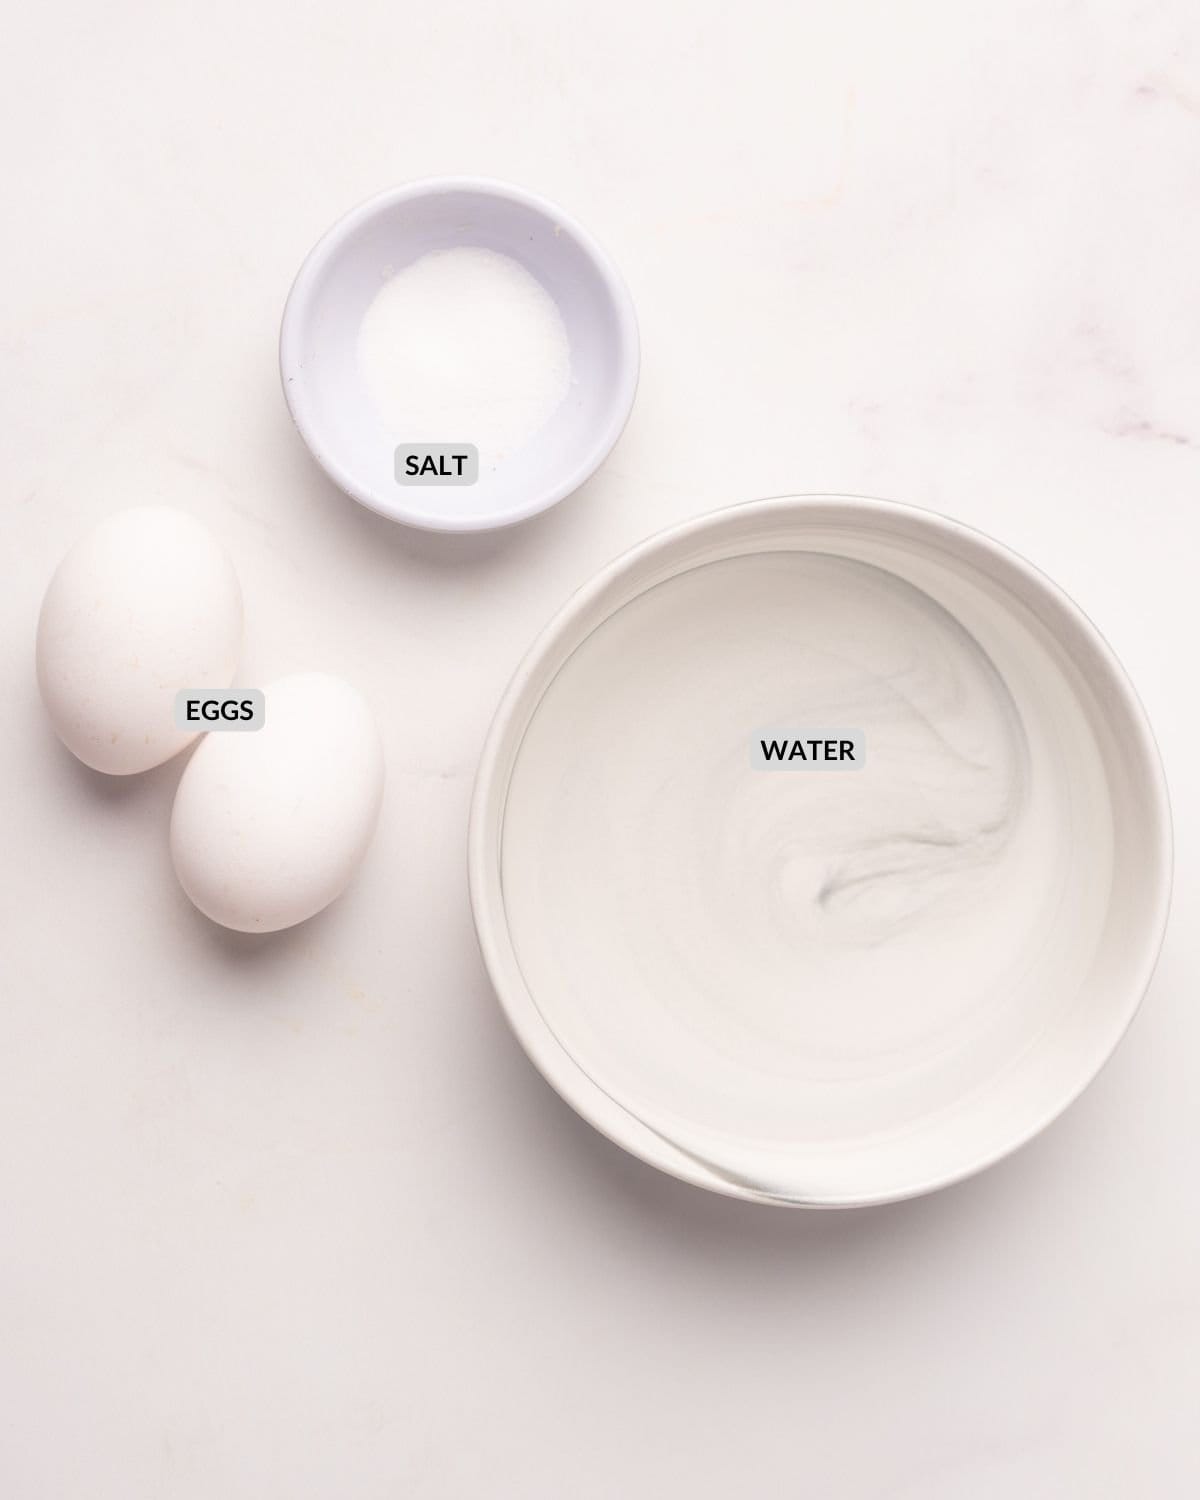 An overhead image of two eggs, salt in a small bowl, and water in another bowl.